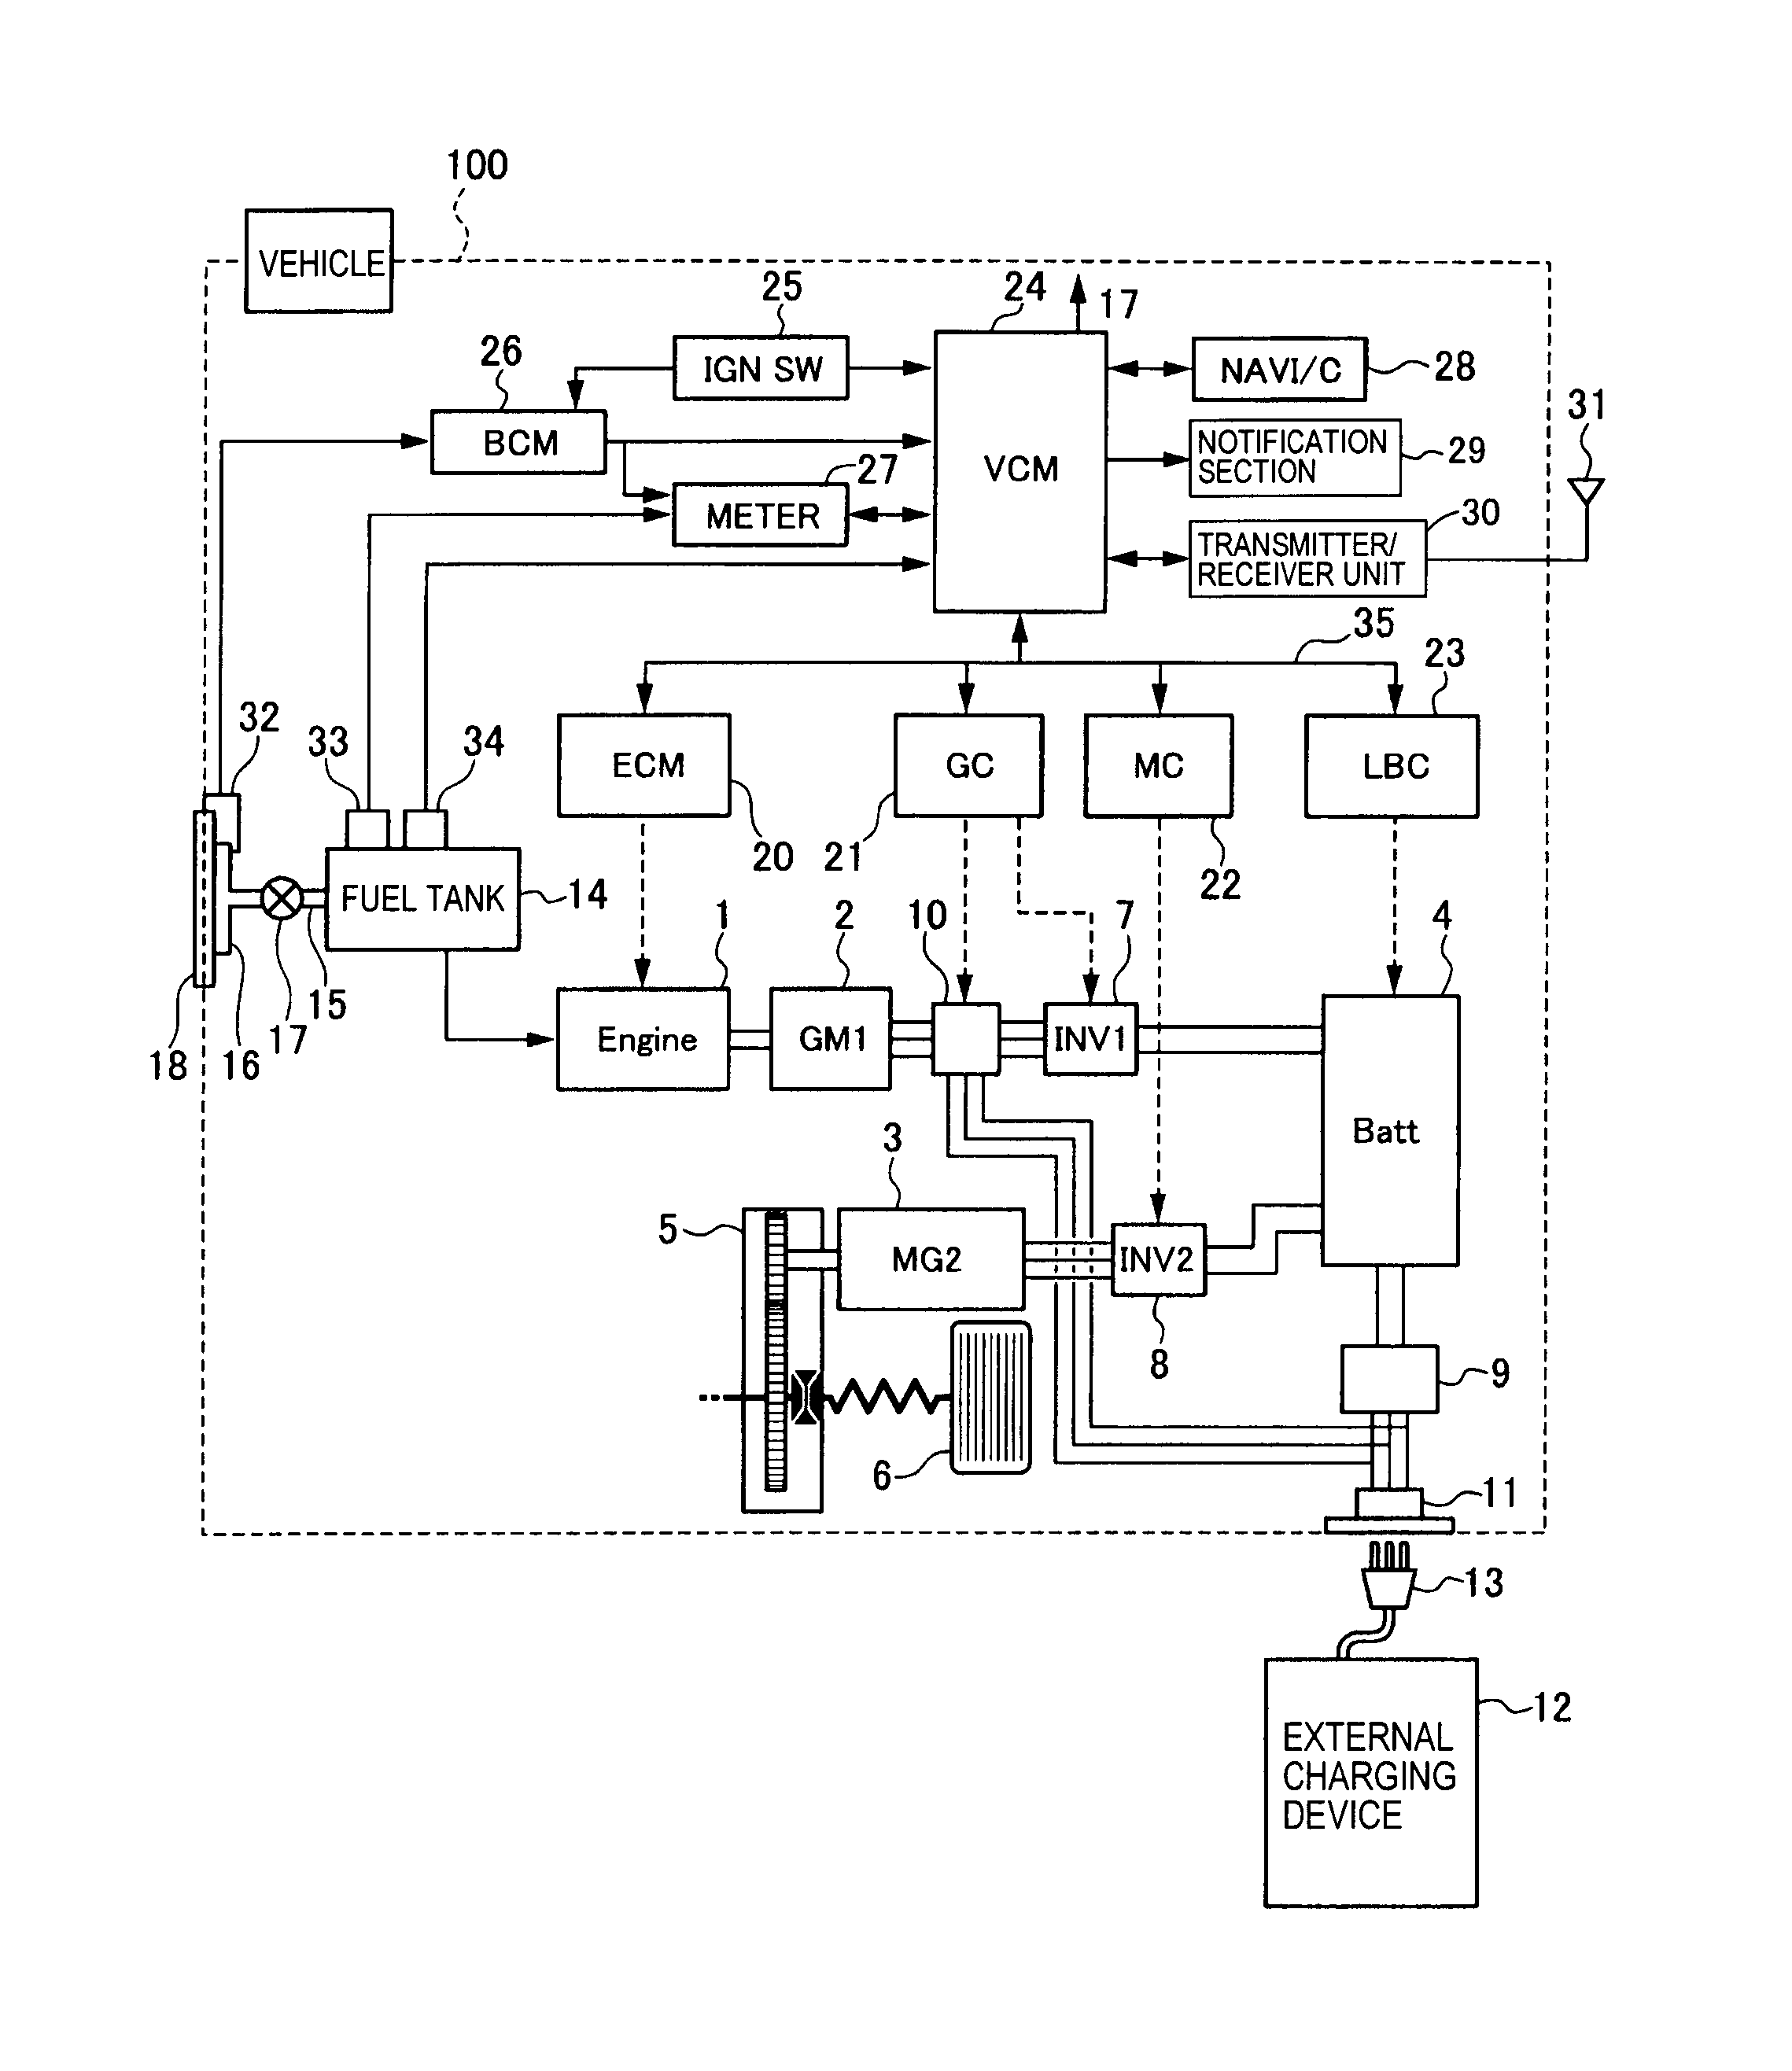 hose diagram for bissell proheat 2x